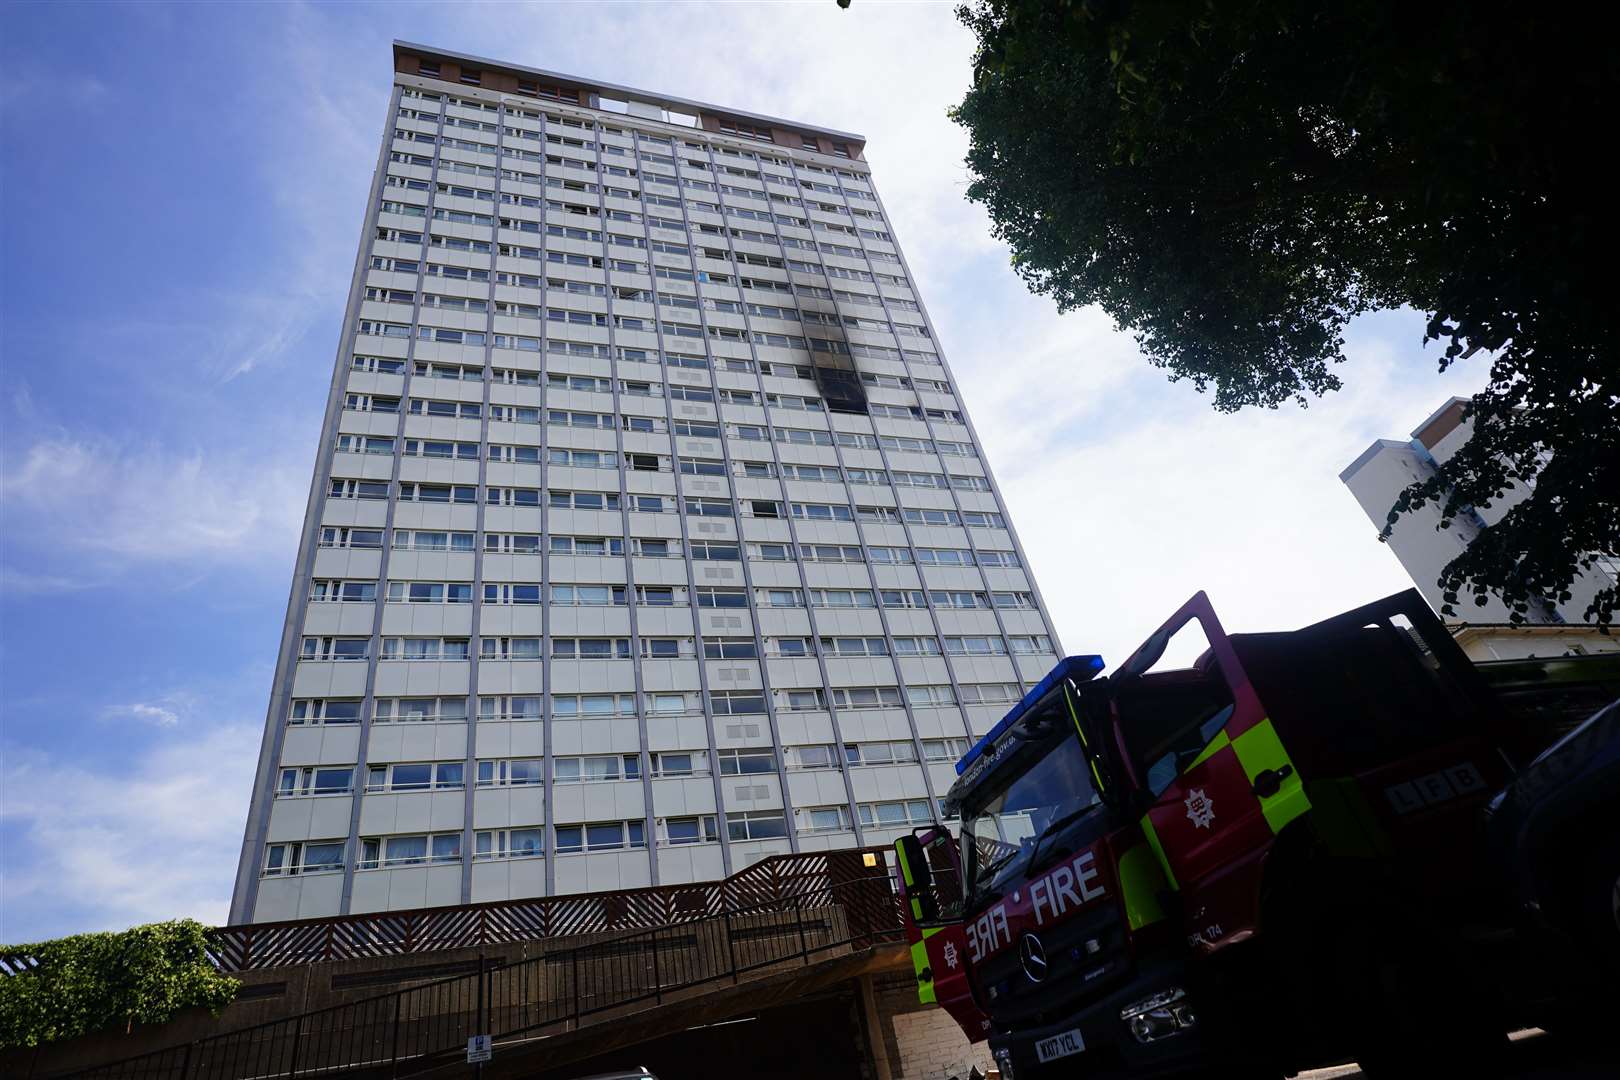 Fire crews in front of the tower block at Stebbing House in Shepherds Bush, London (PA)